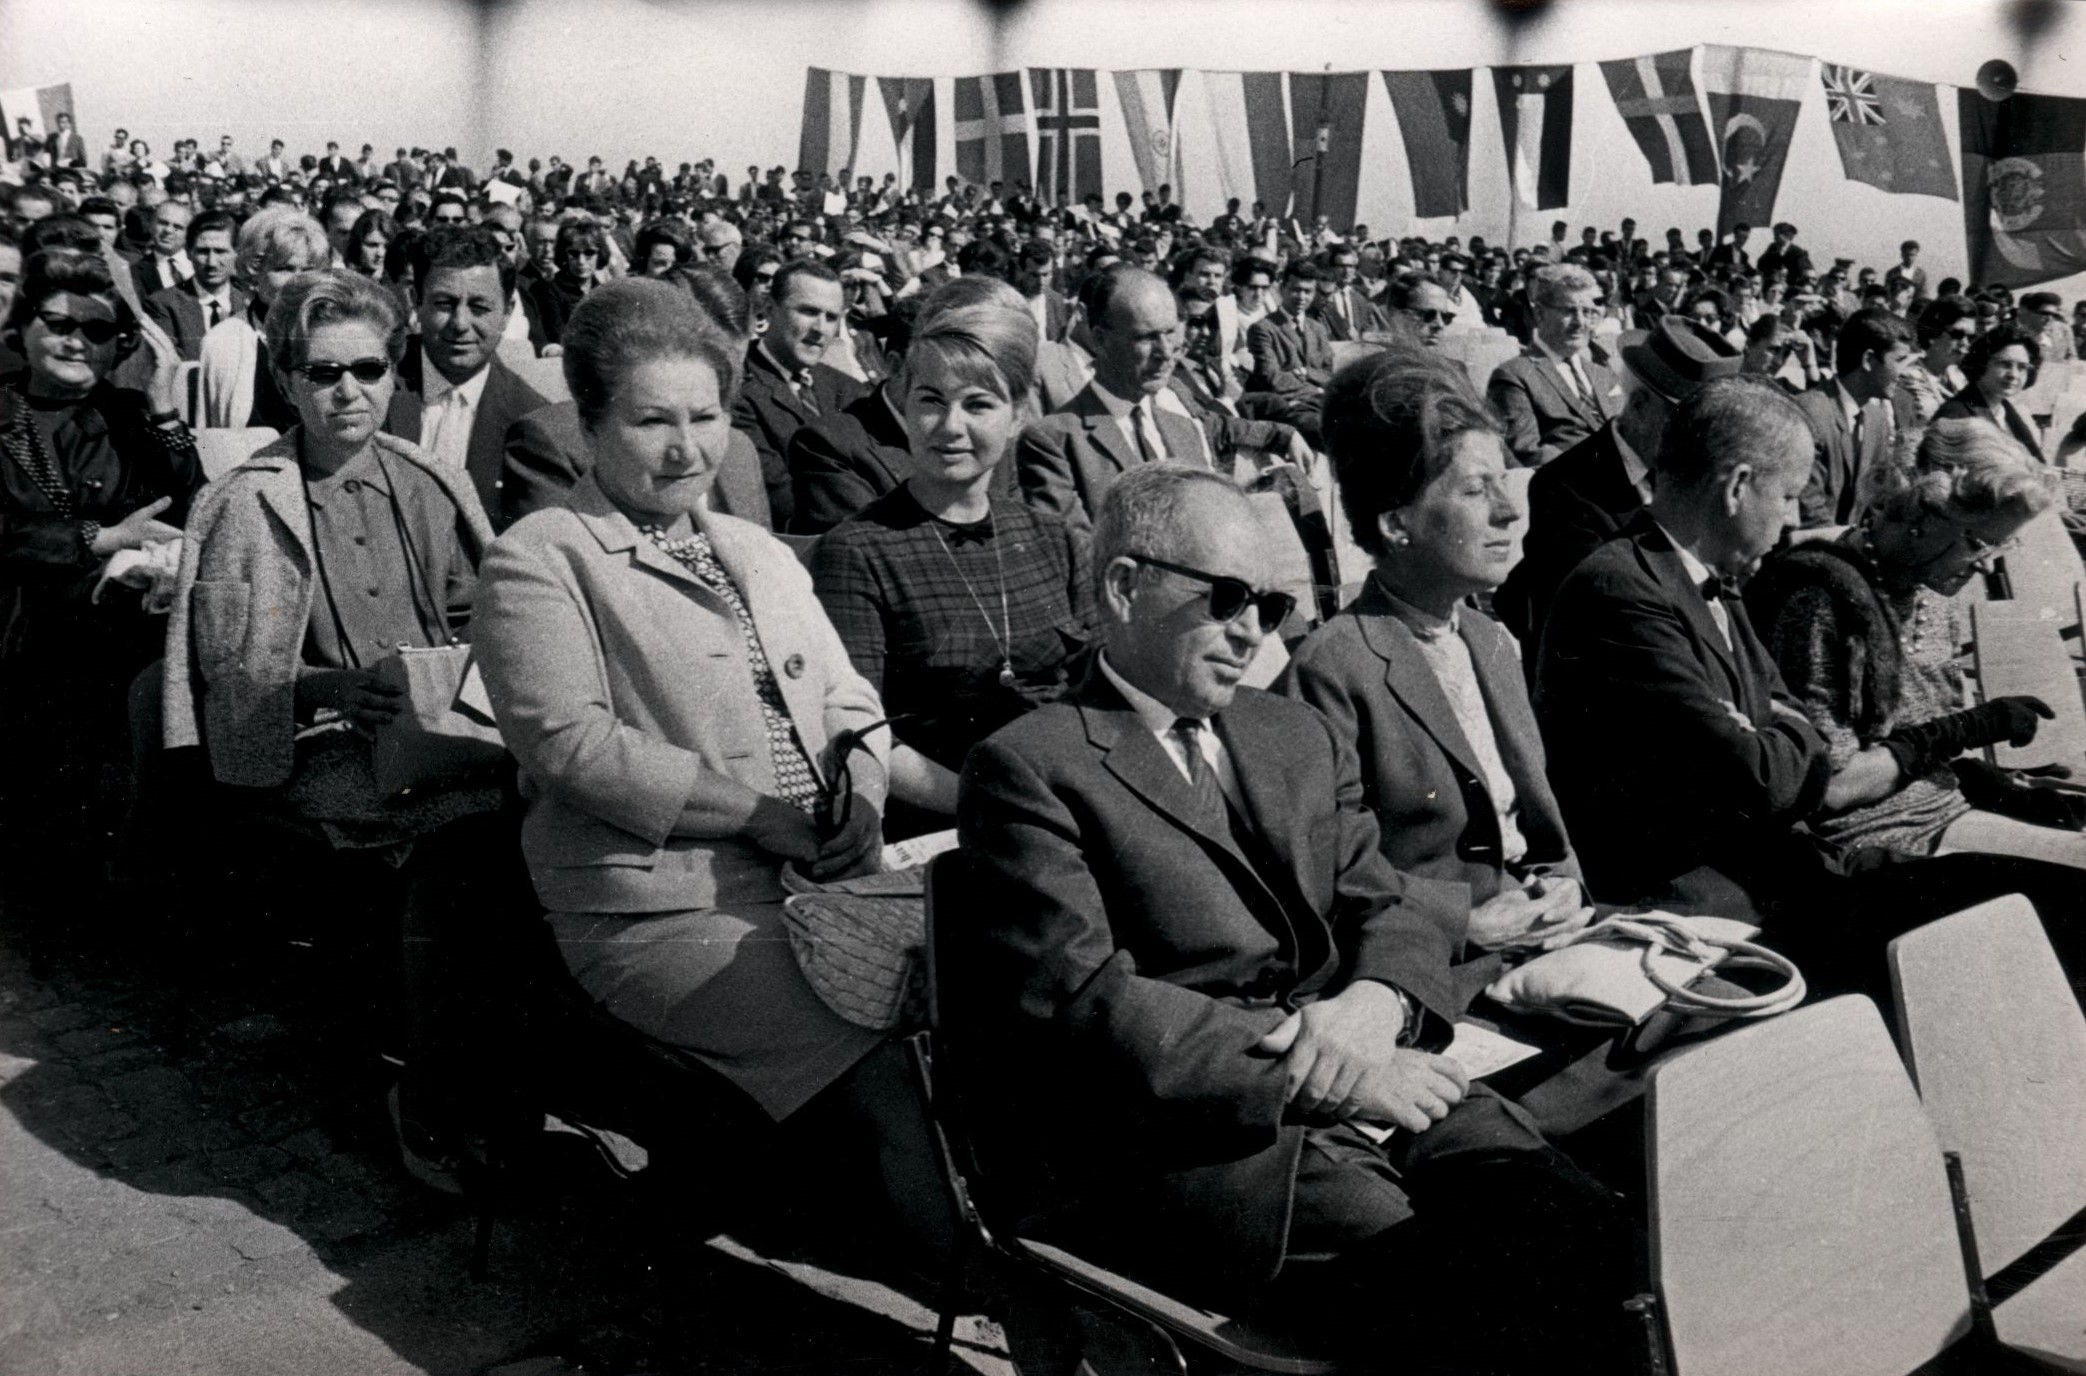 Administrative staff at the opening ceremony of the academic year 1964-1965